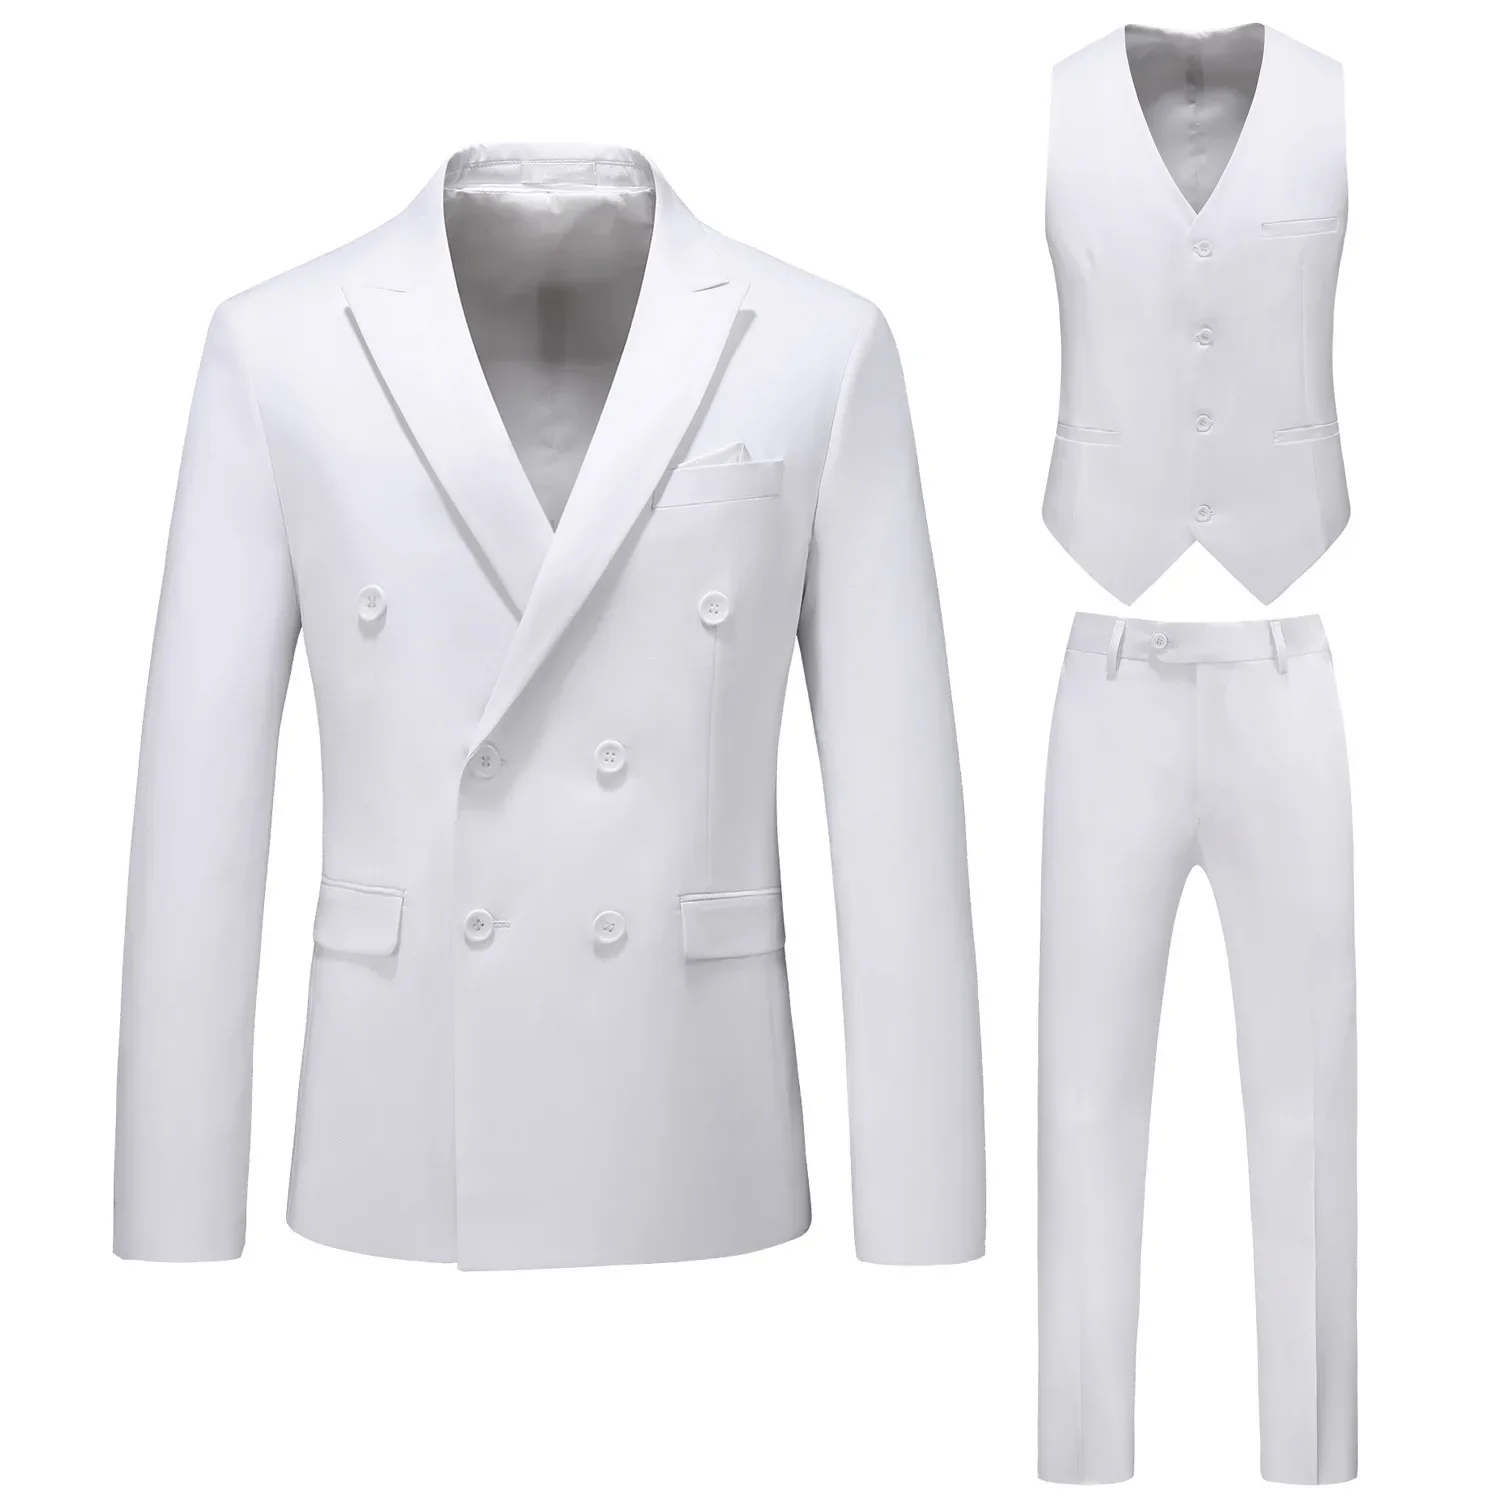 

XX581Double-breasted groomsmen button solid color hollow foreign trade cross-border suit business formal wear